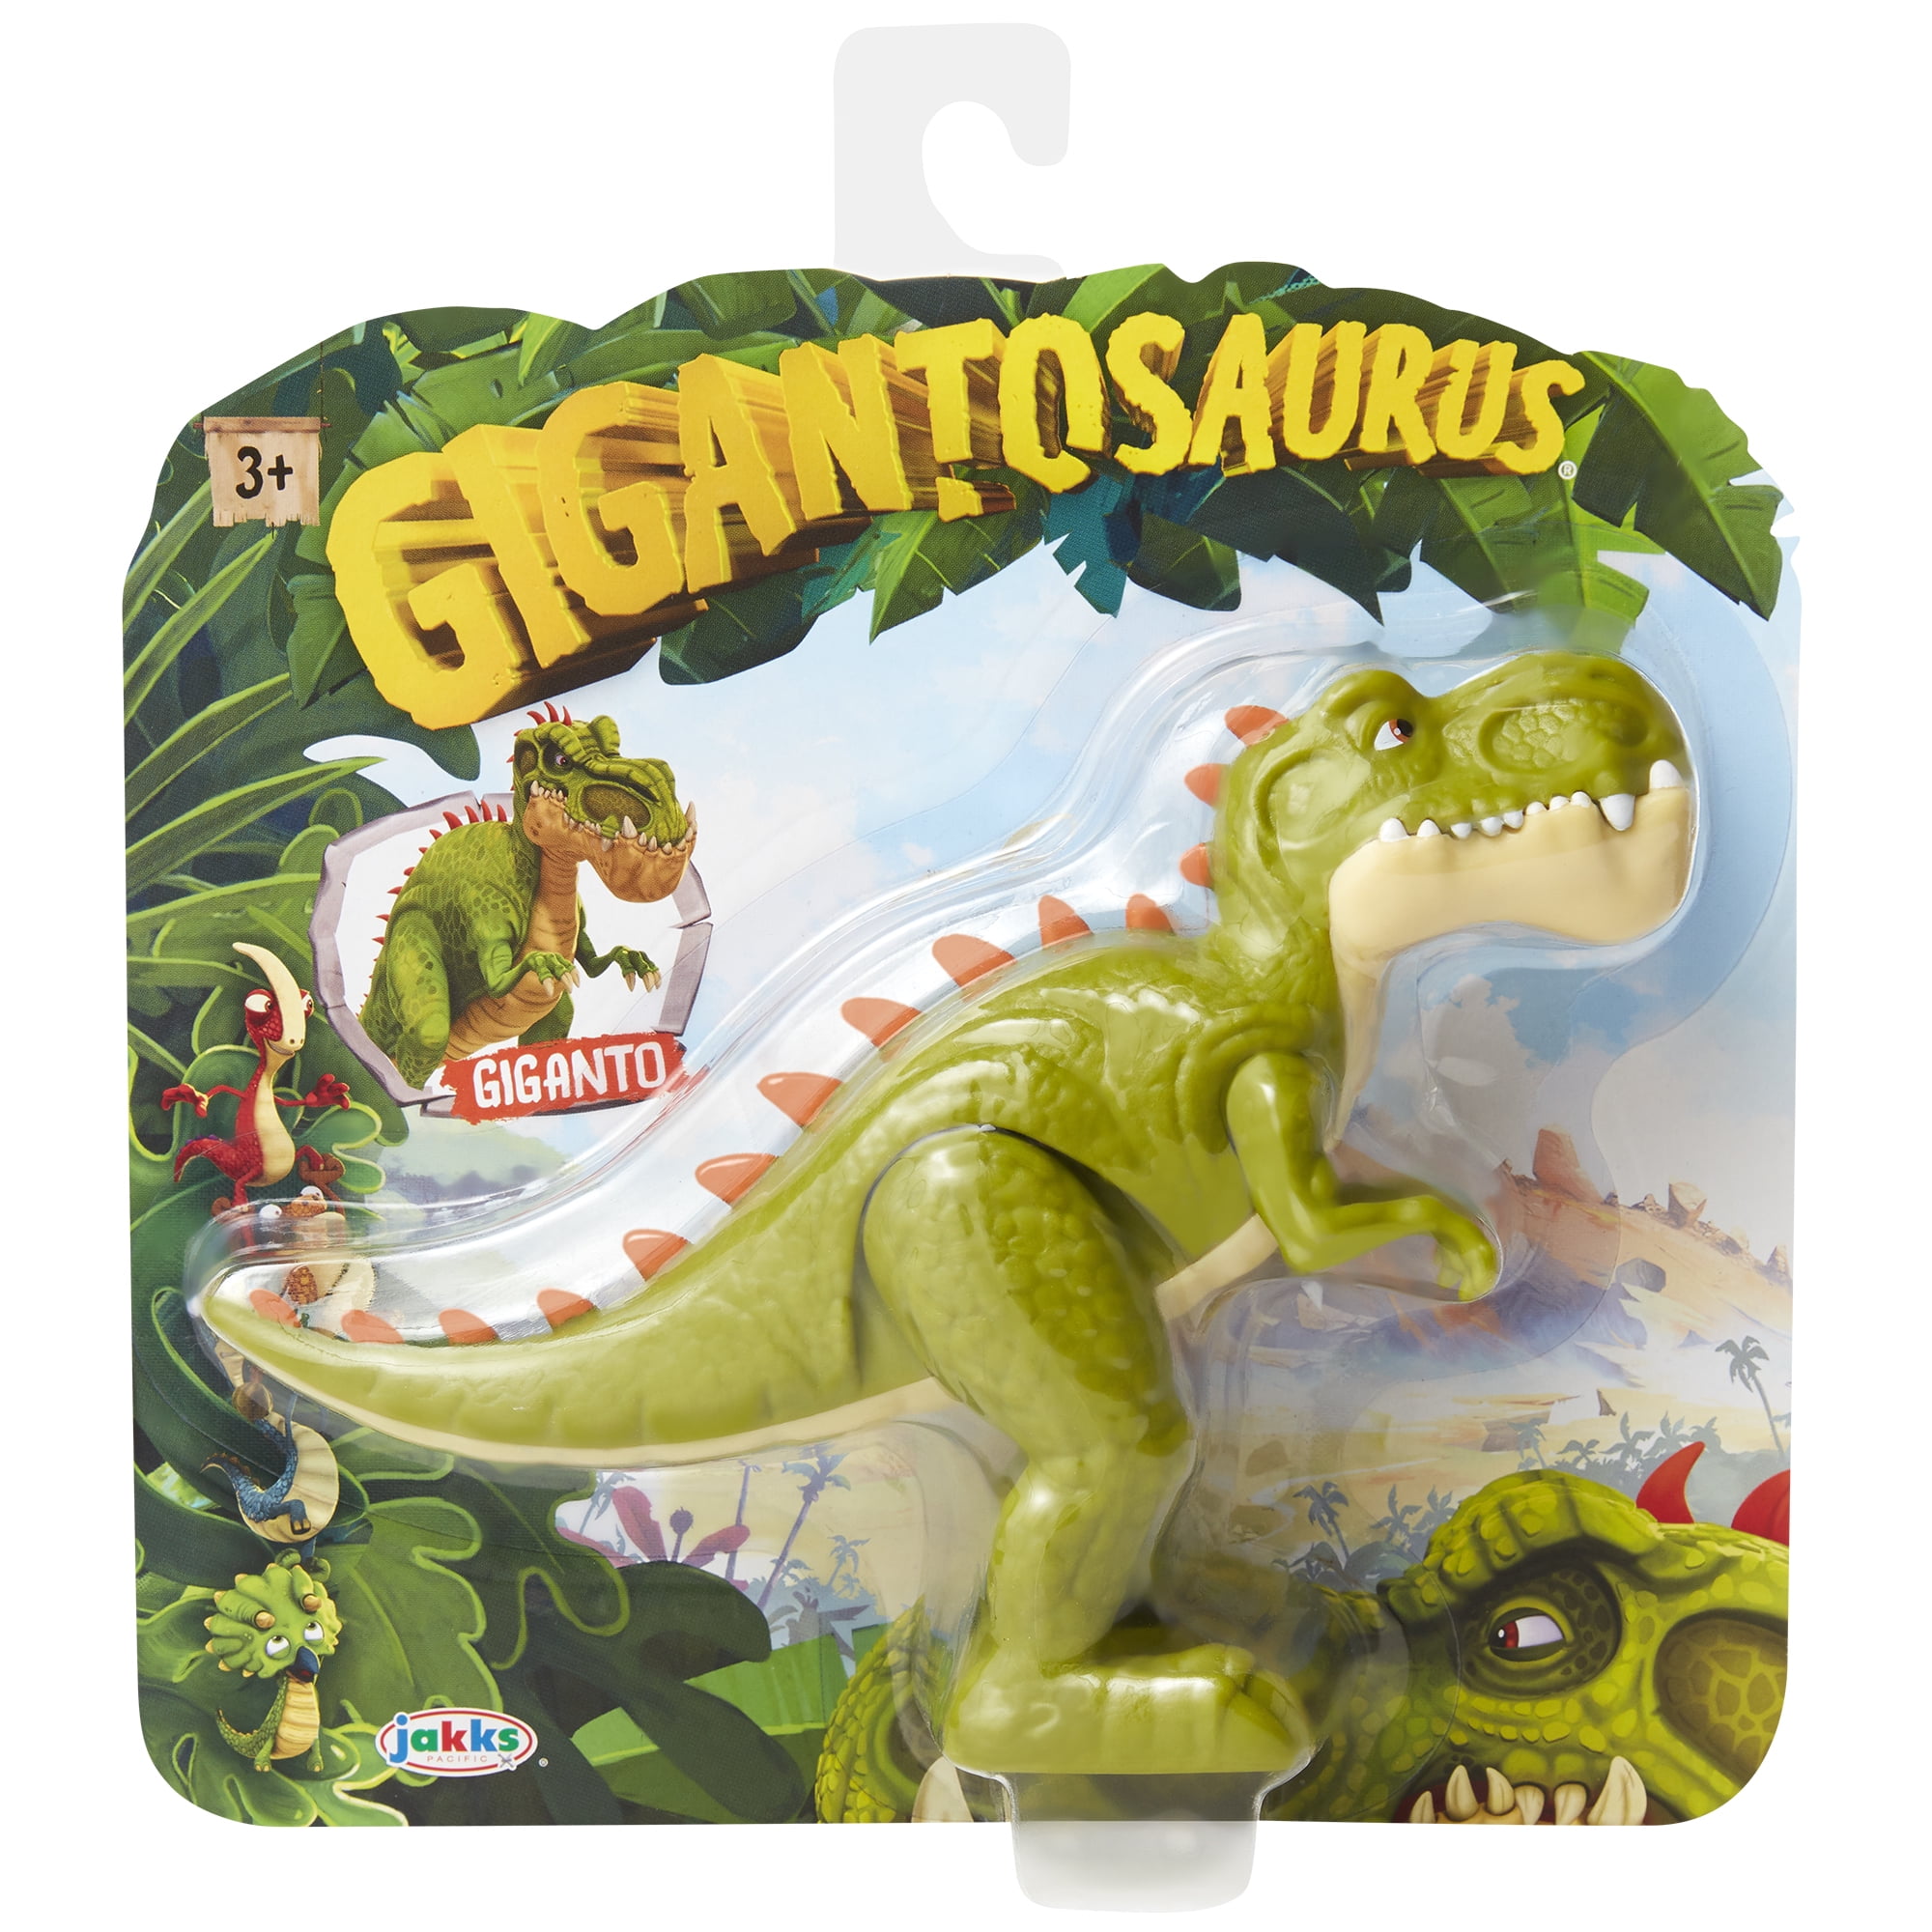 Gigantosaurus Giganto Character Figure with Articulated Limbs, Dino Toy  Stands 4.5 Tall & 7 Long, Dinosaur Toys for Boys & Girls 3 Years Old & Up